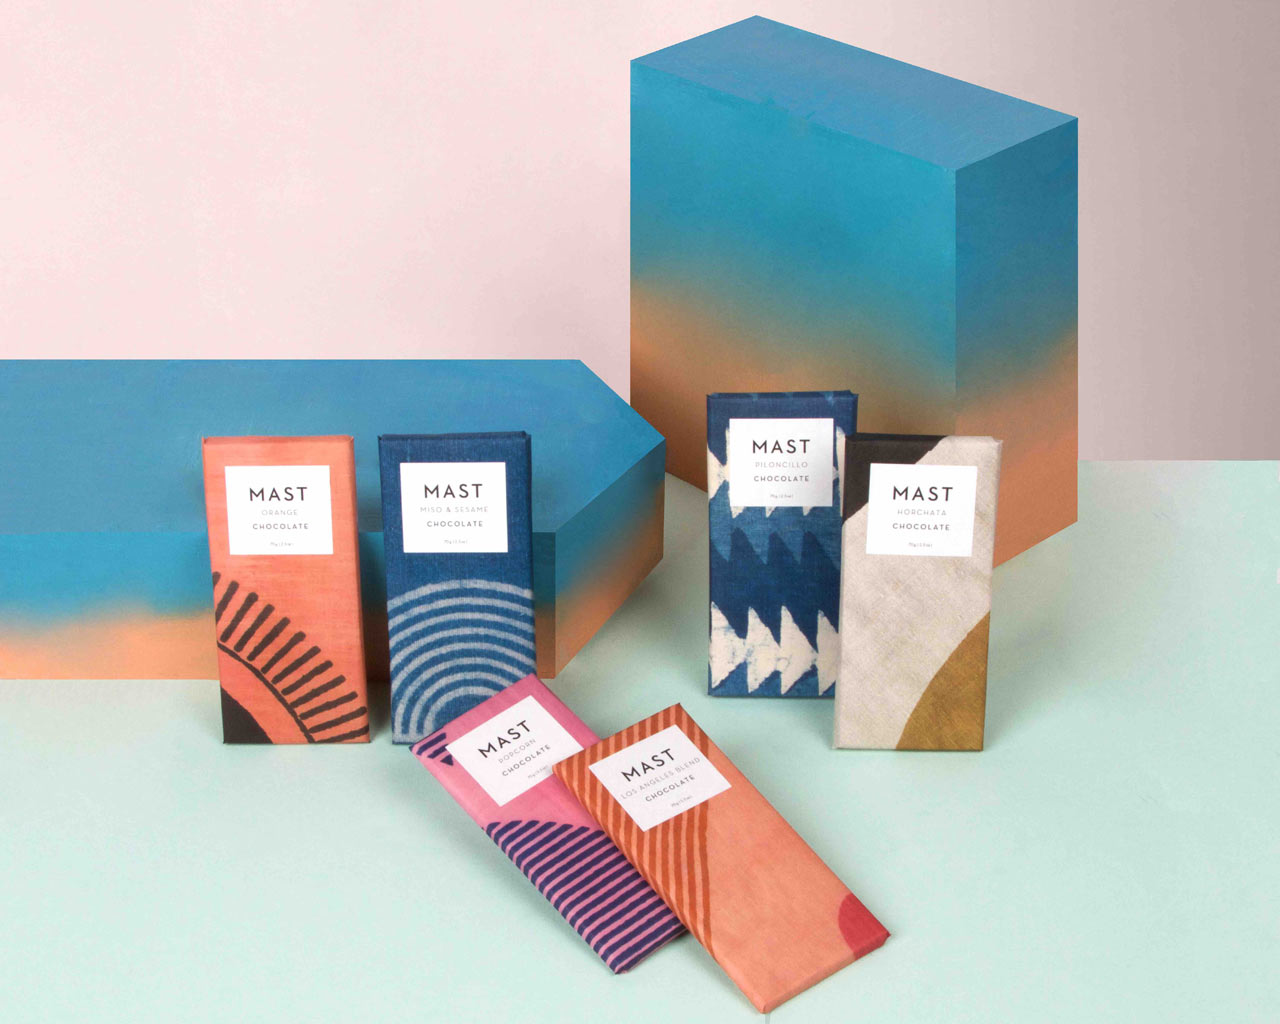 MAST Launches City-Inspired Chocolate Collections